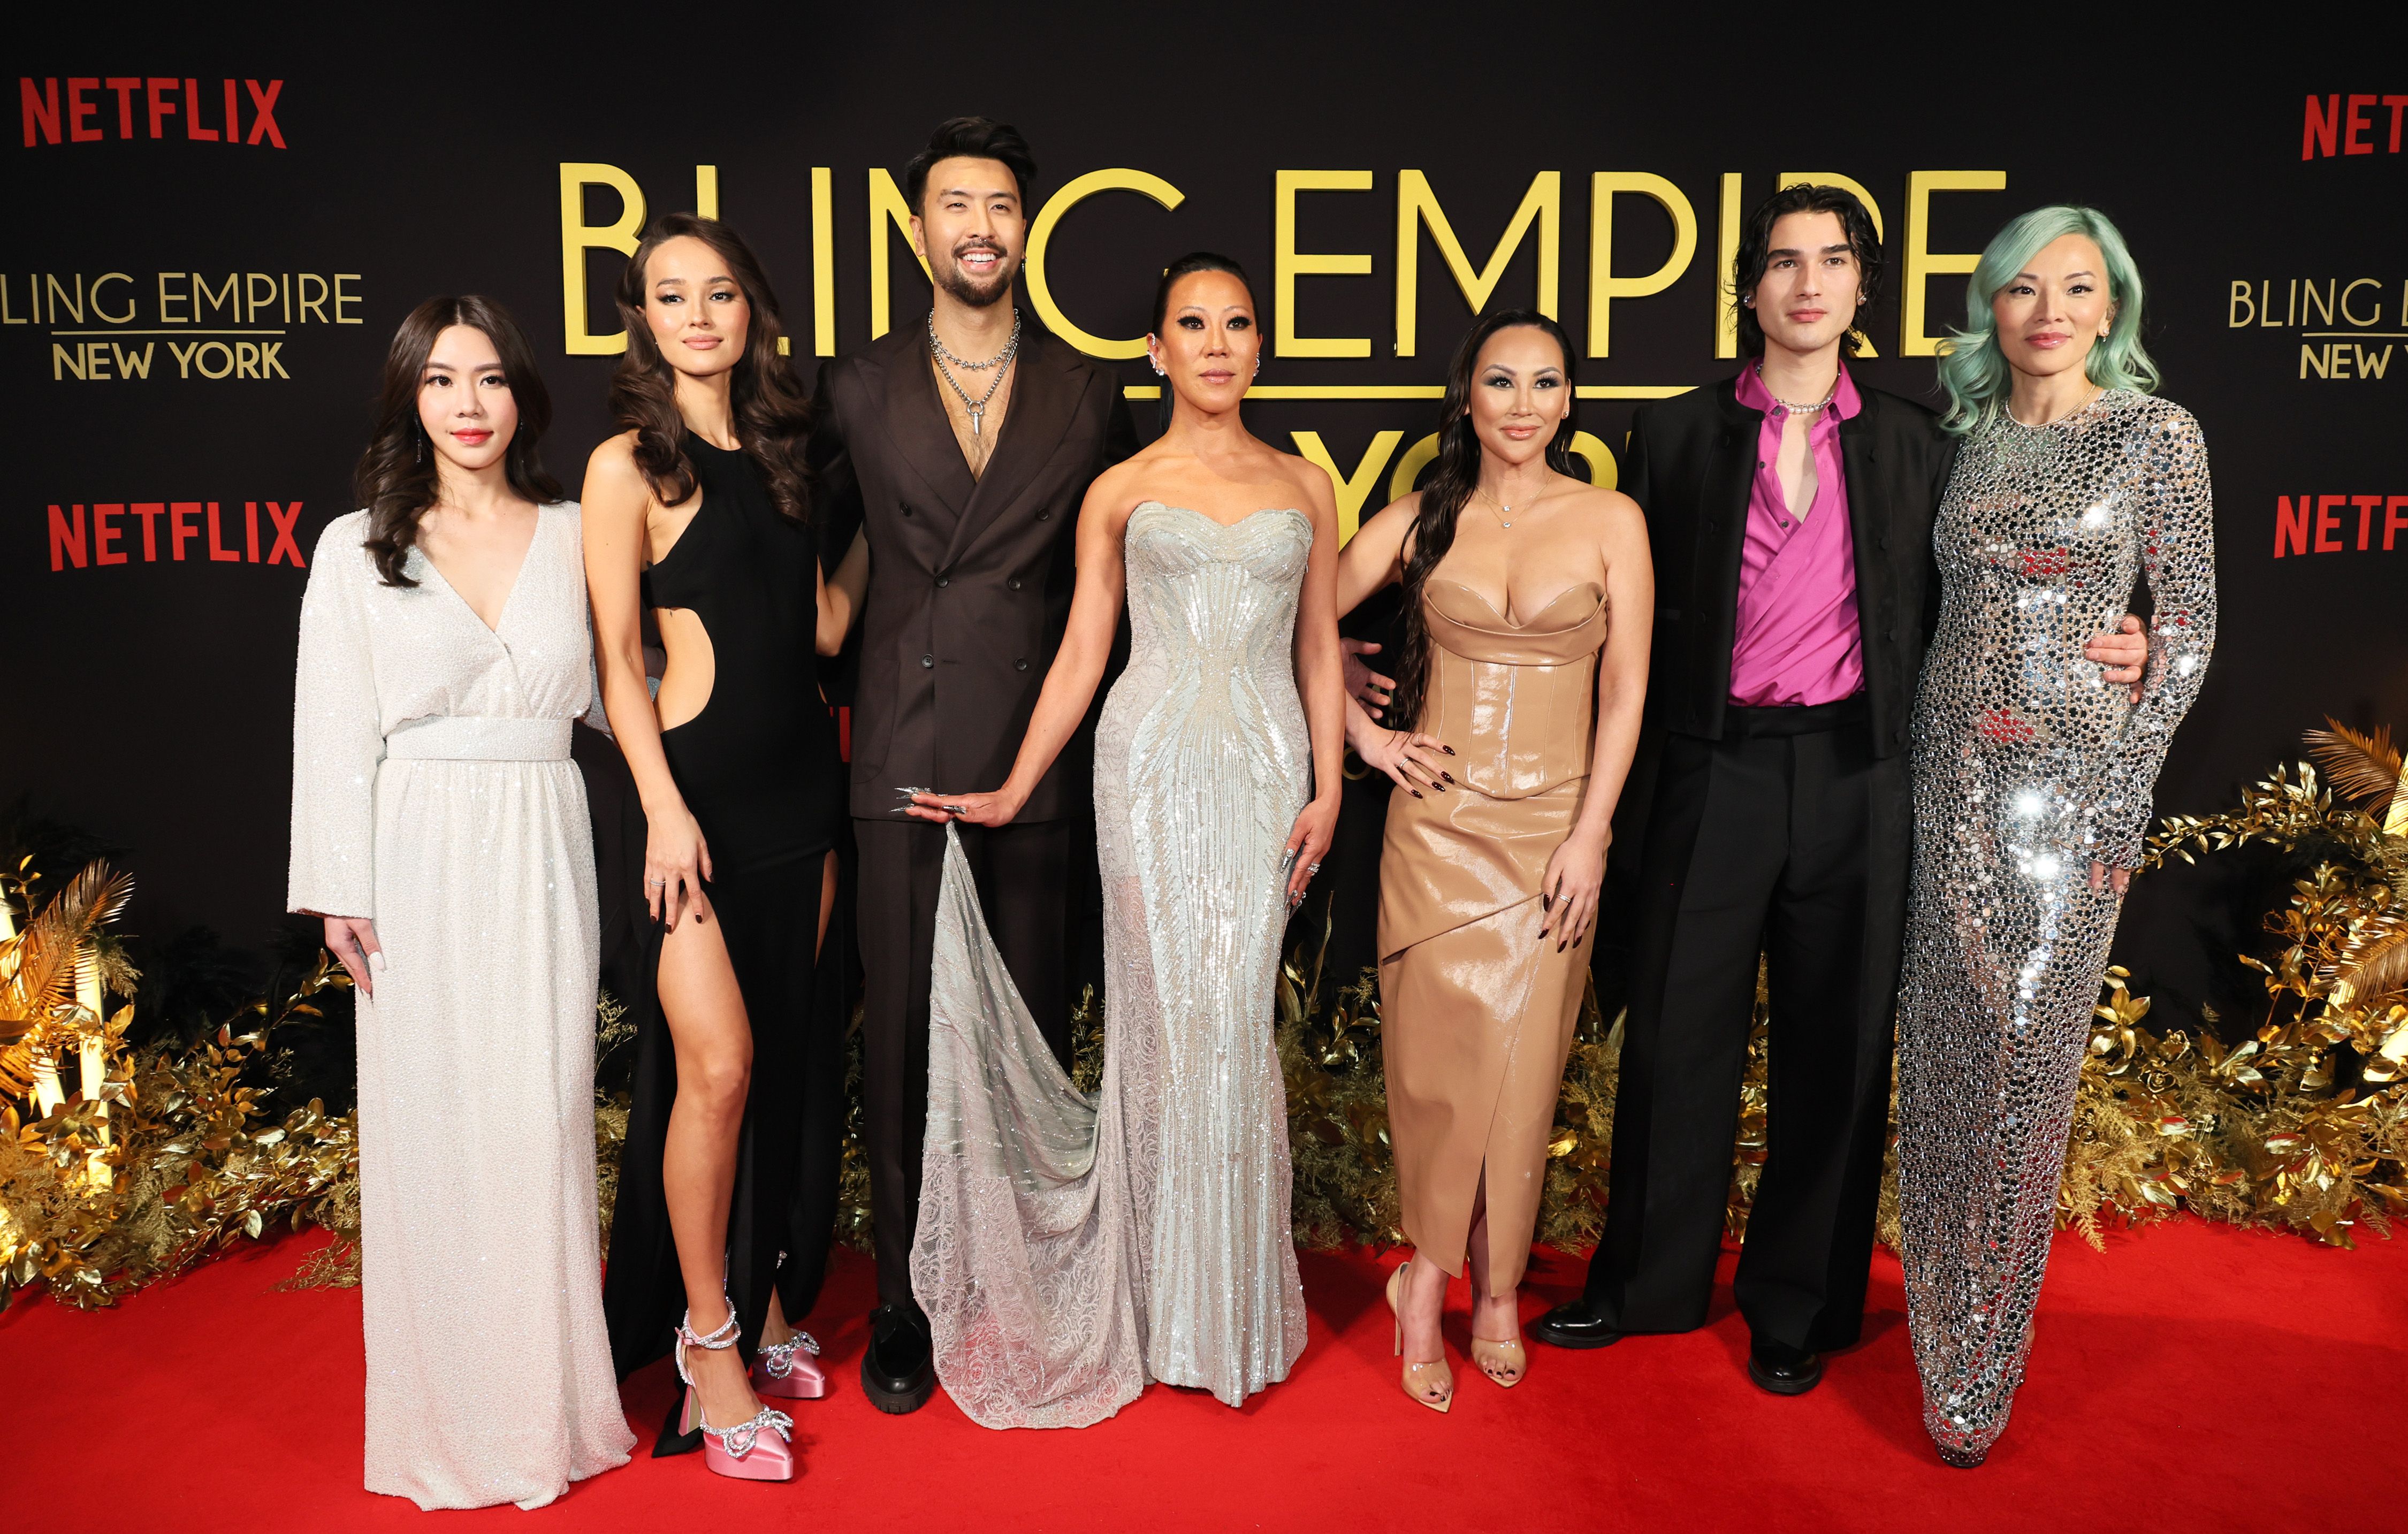 What Are The 'Bling Empire: New York' Cast Net Worths?